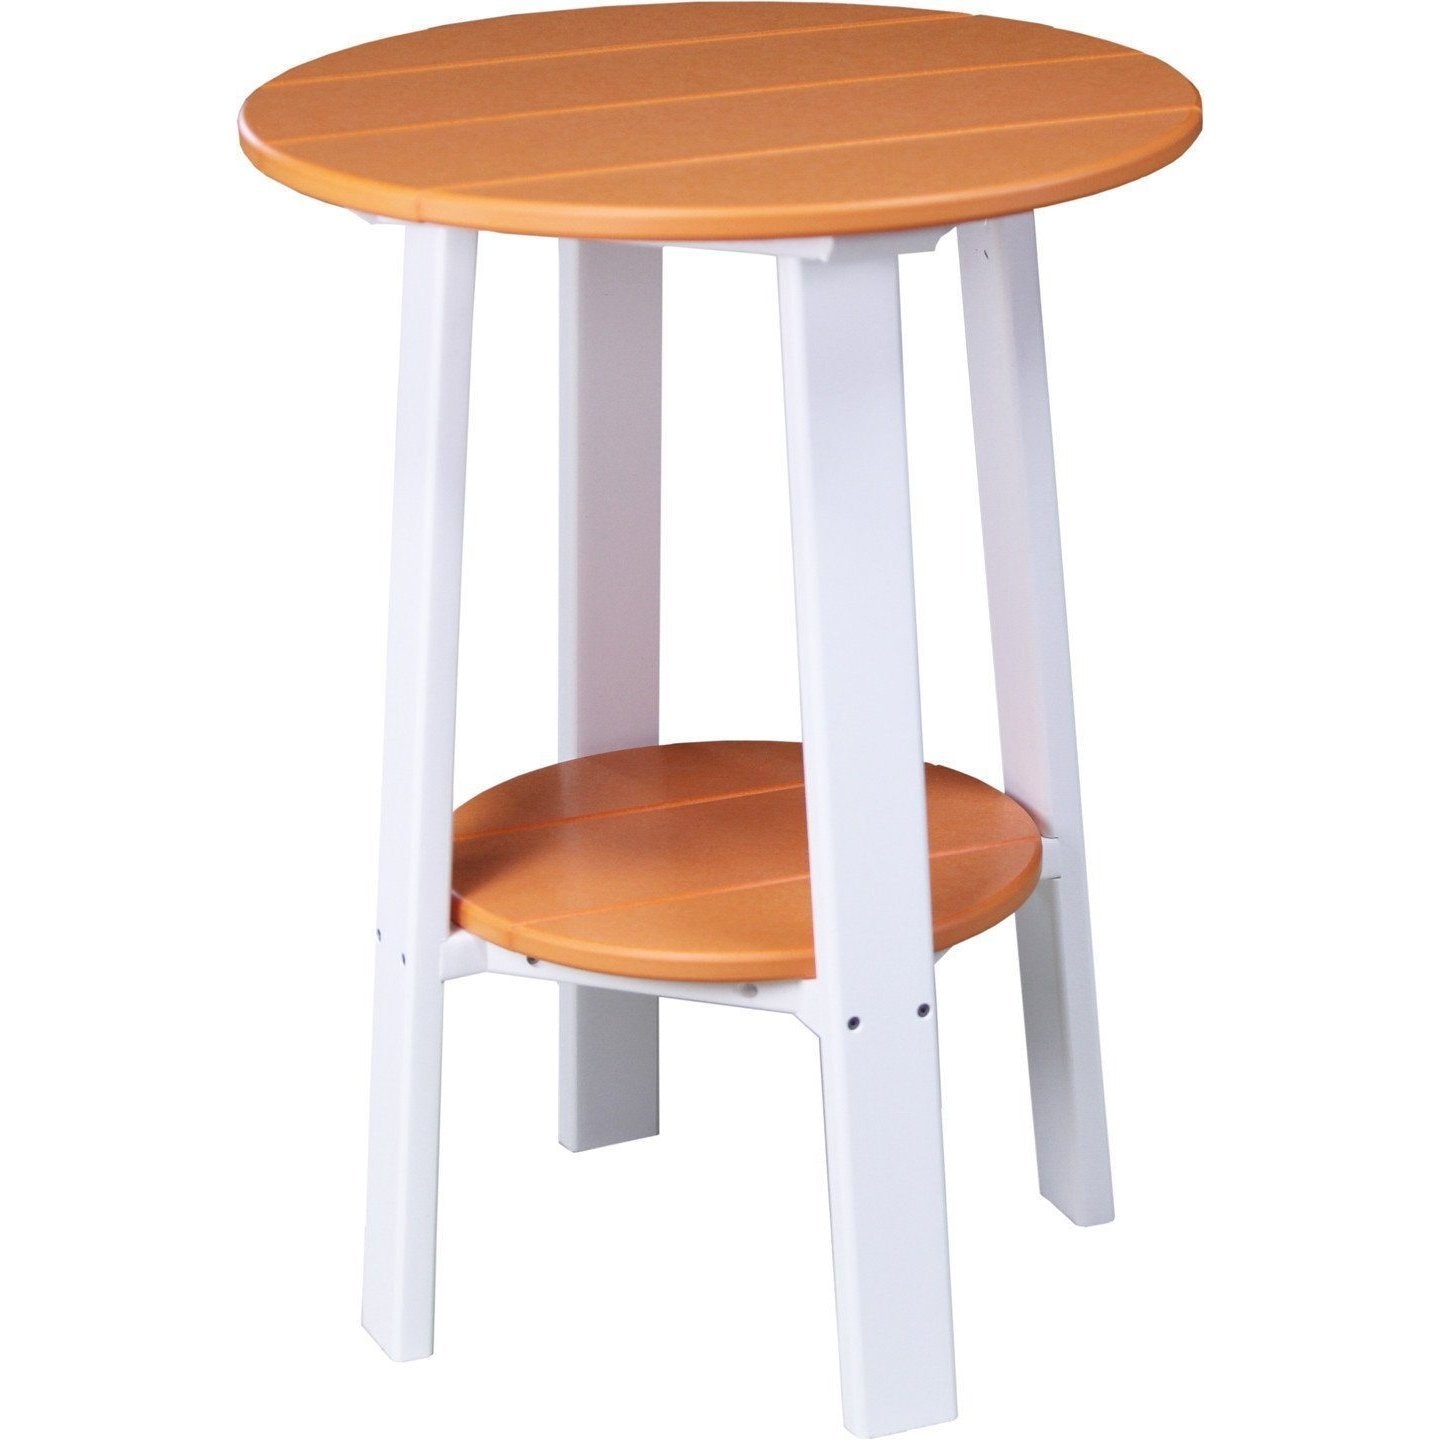 Outdoor 28" Deluxe End Table   Tangerine & White